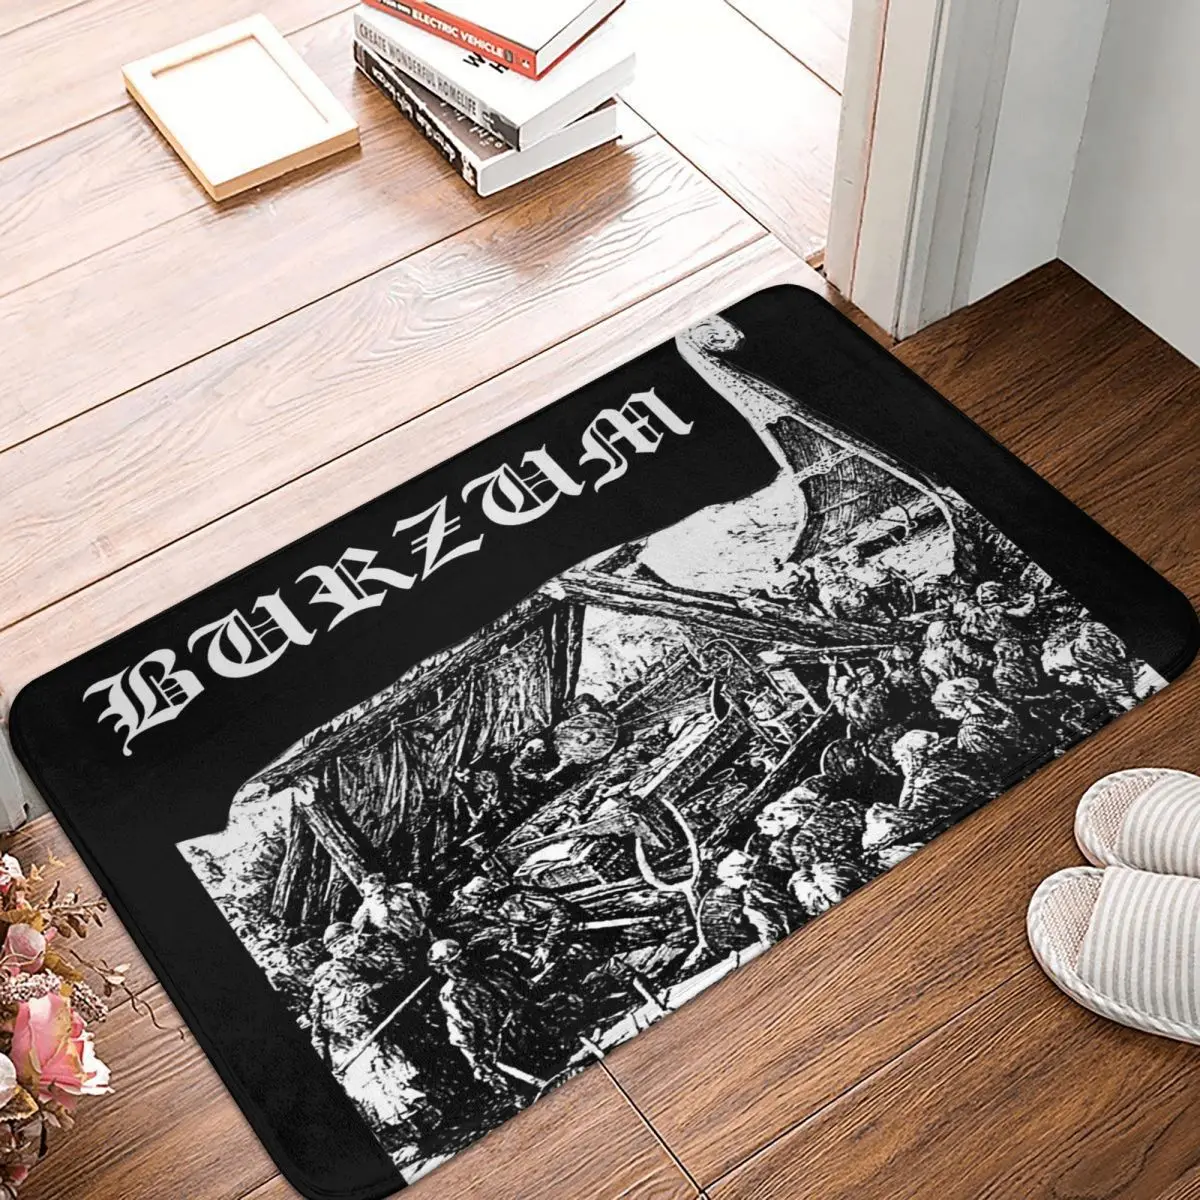 

Burzum Hvis Lyset Tar Oss Cover Design Personality Carpet, Polyester Floor Mats Popular Durable Easy To Clean Birthday Gifts